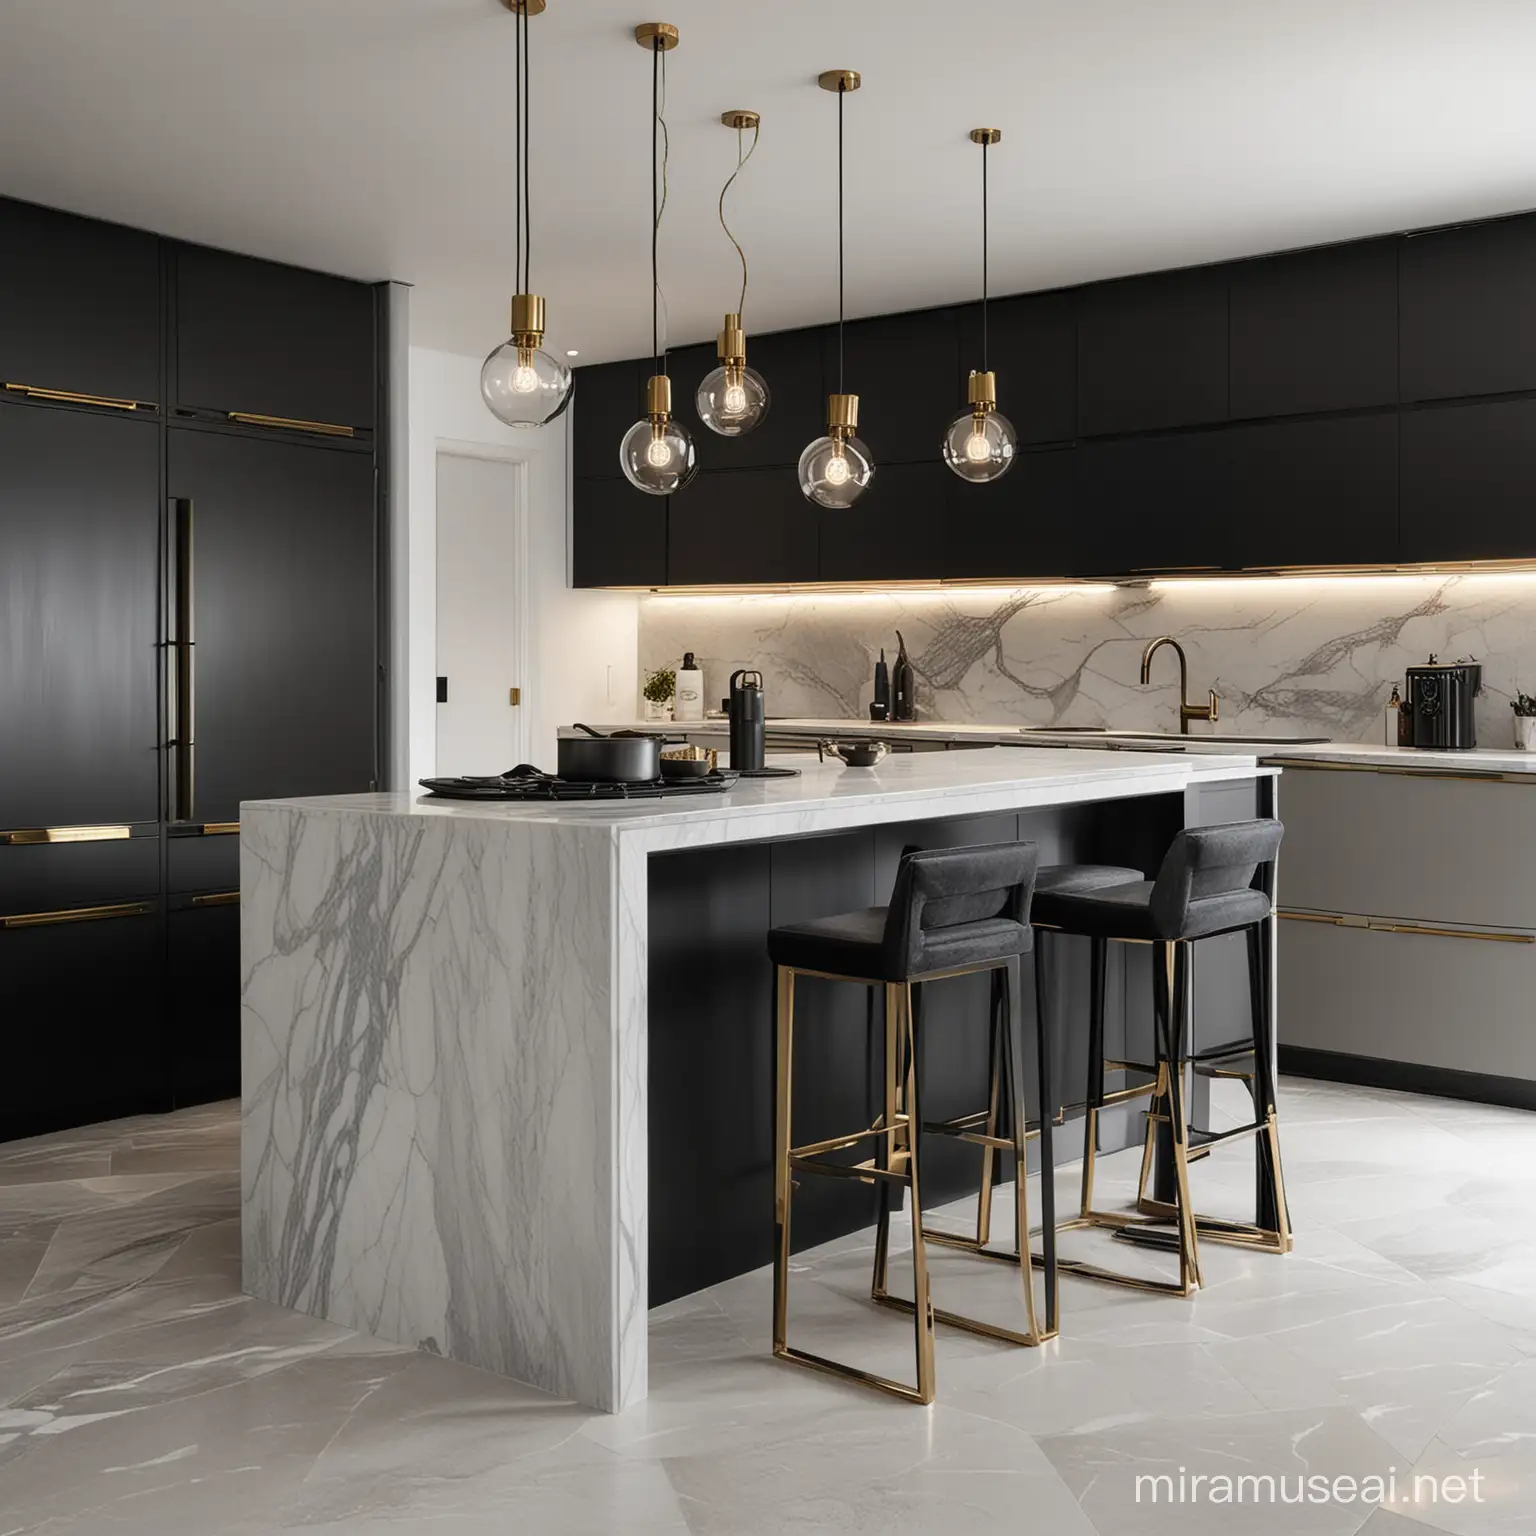 black, light grey, black wood, marble , modern kitchen with brass elements, amazing modern lamps, 